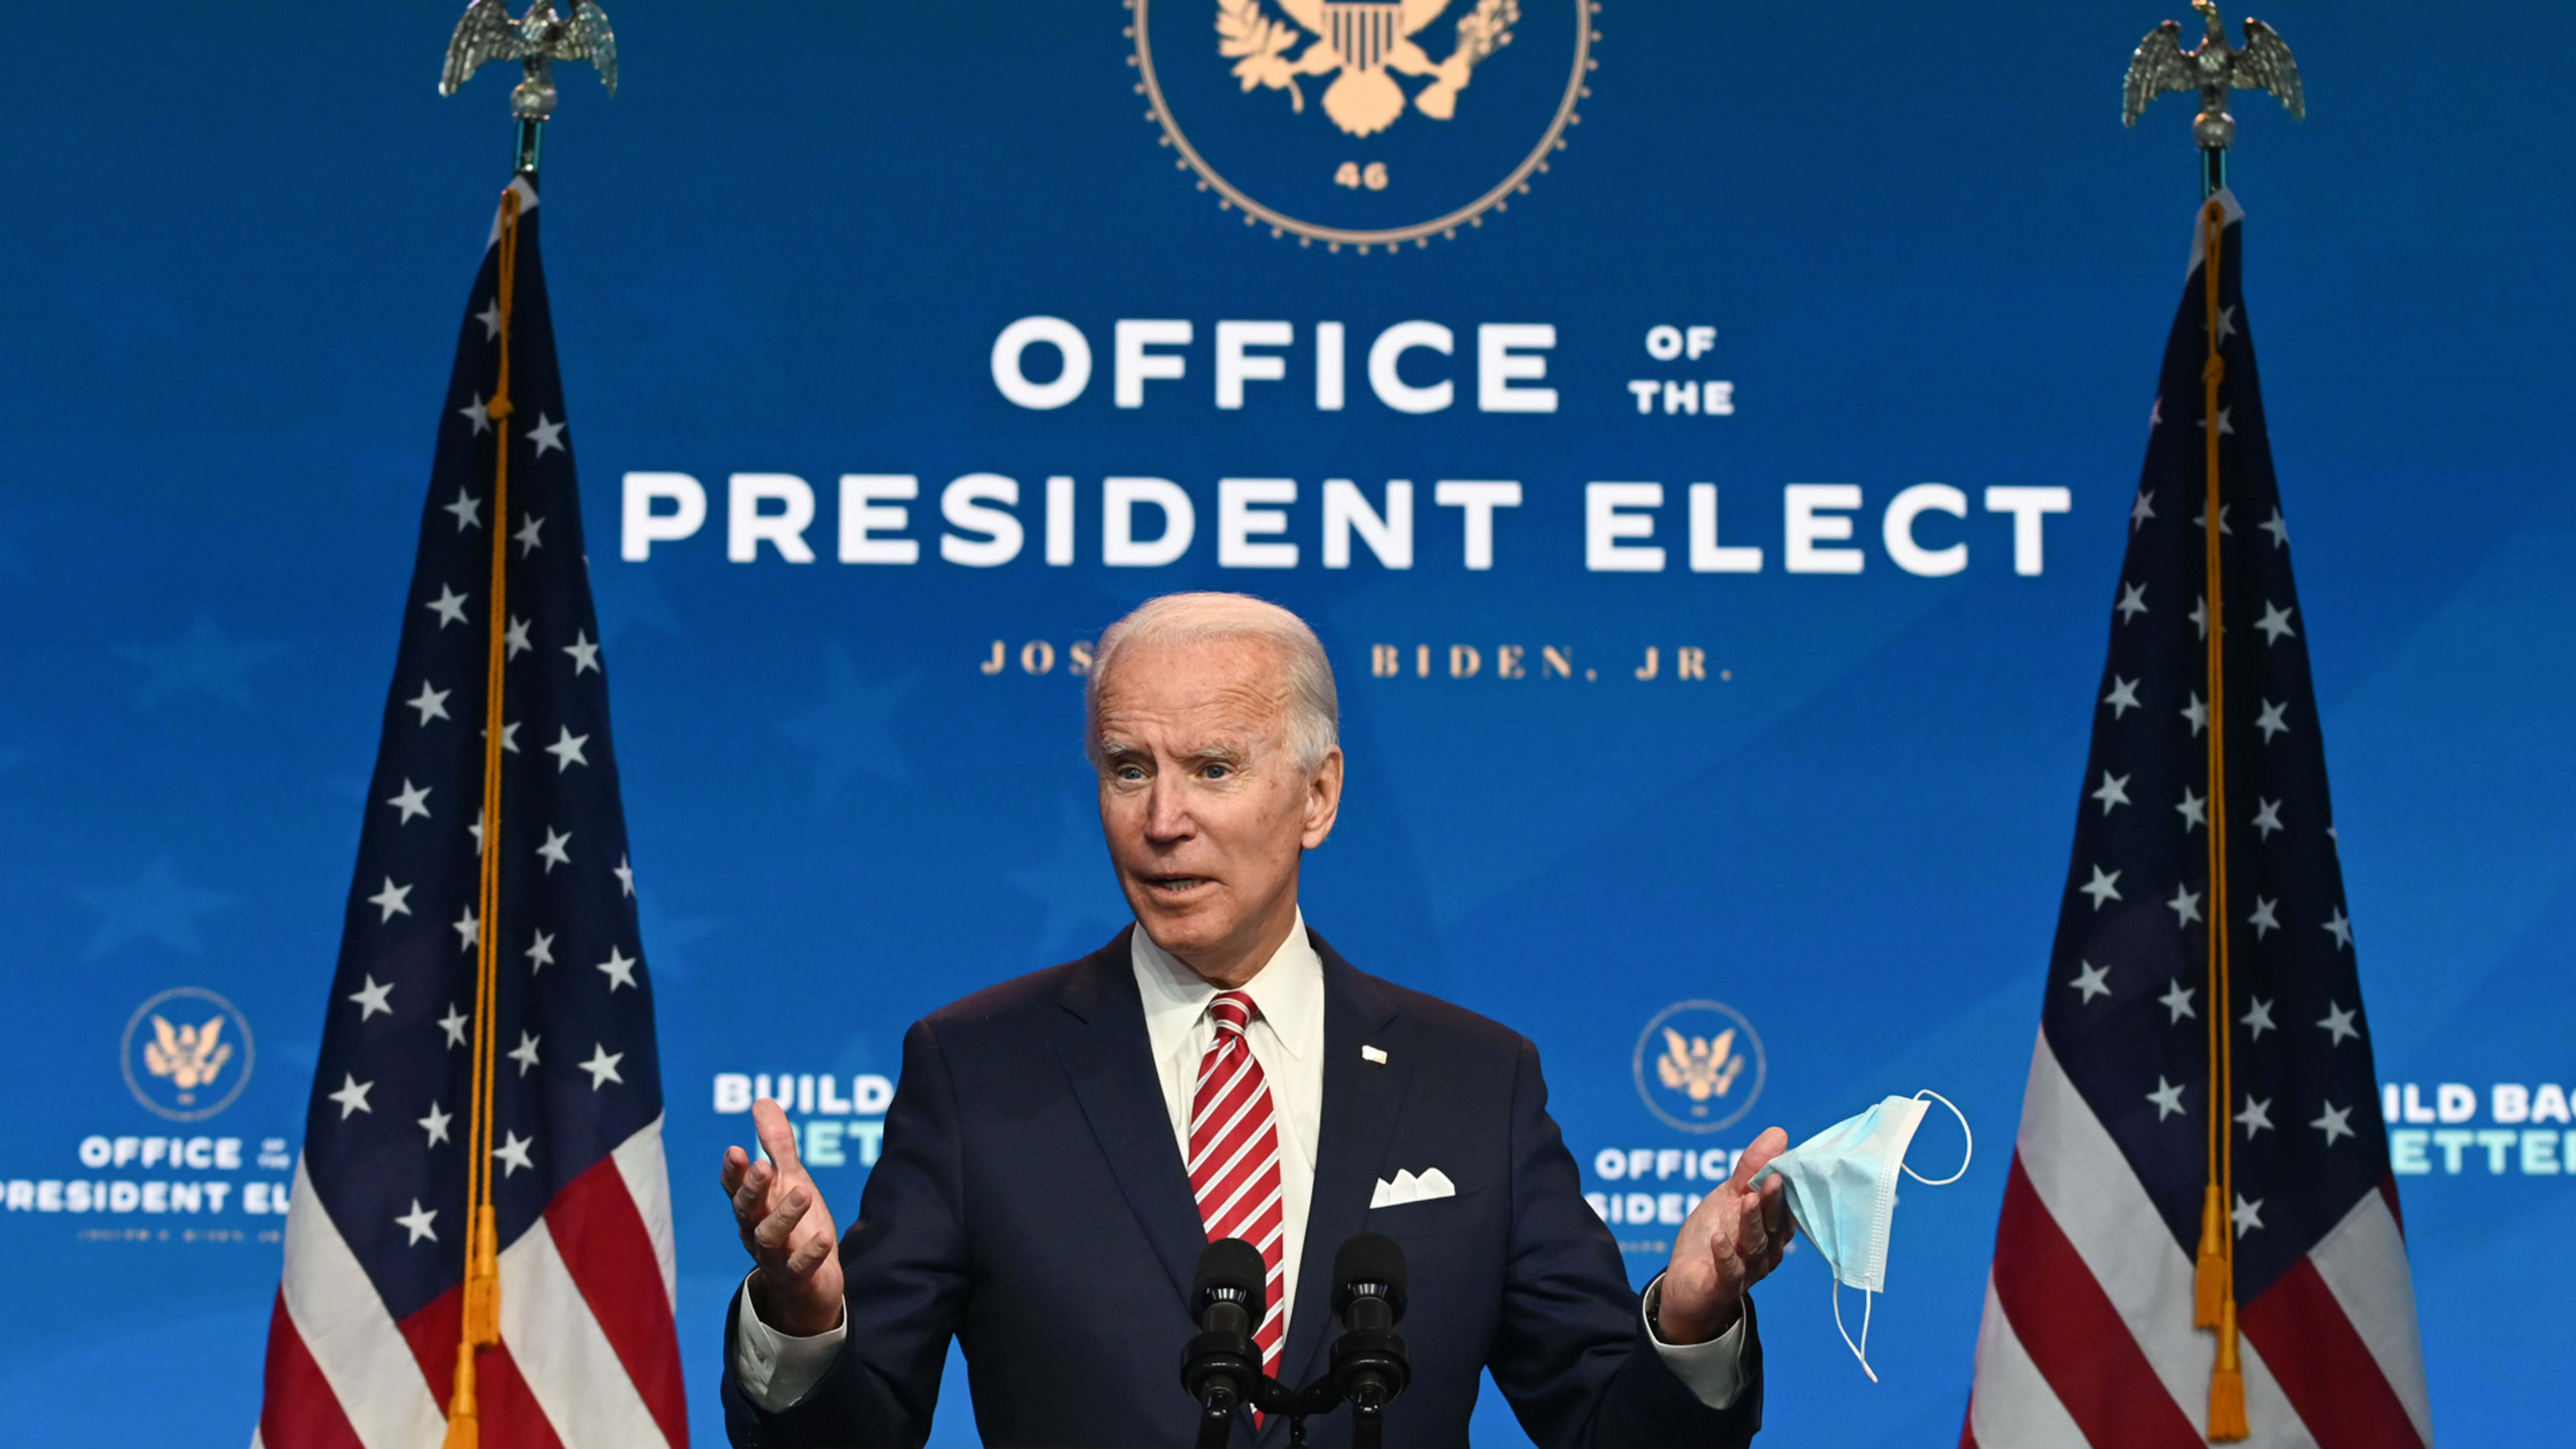 It’s time to talk about how Joe Biden defeated a dominant model of leadership